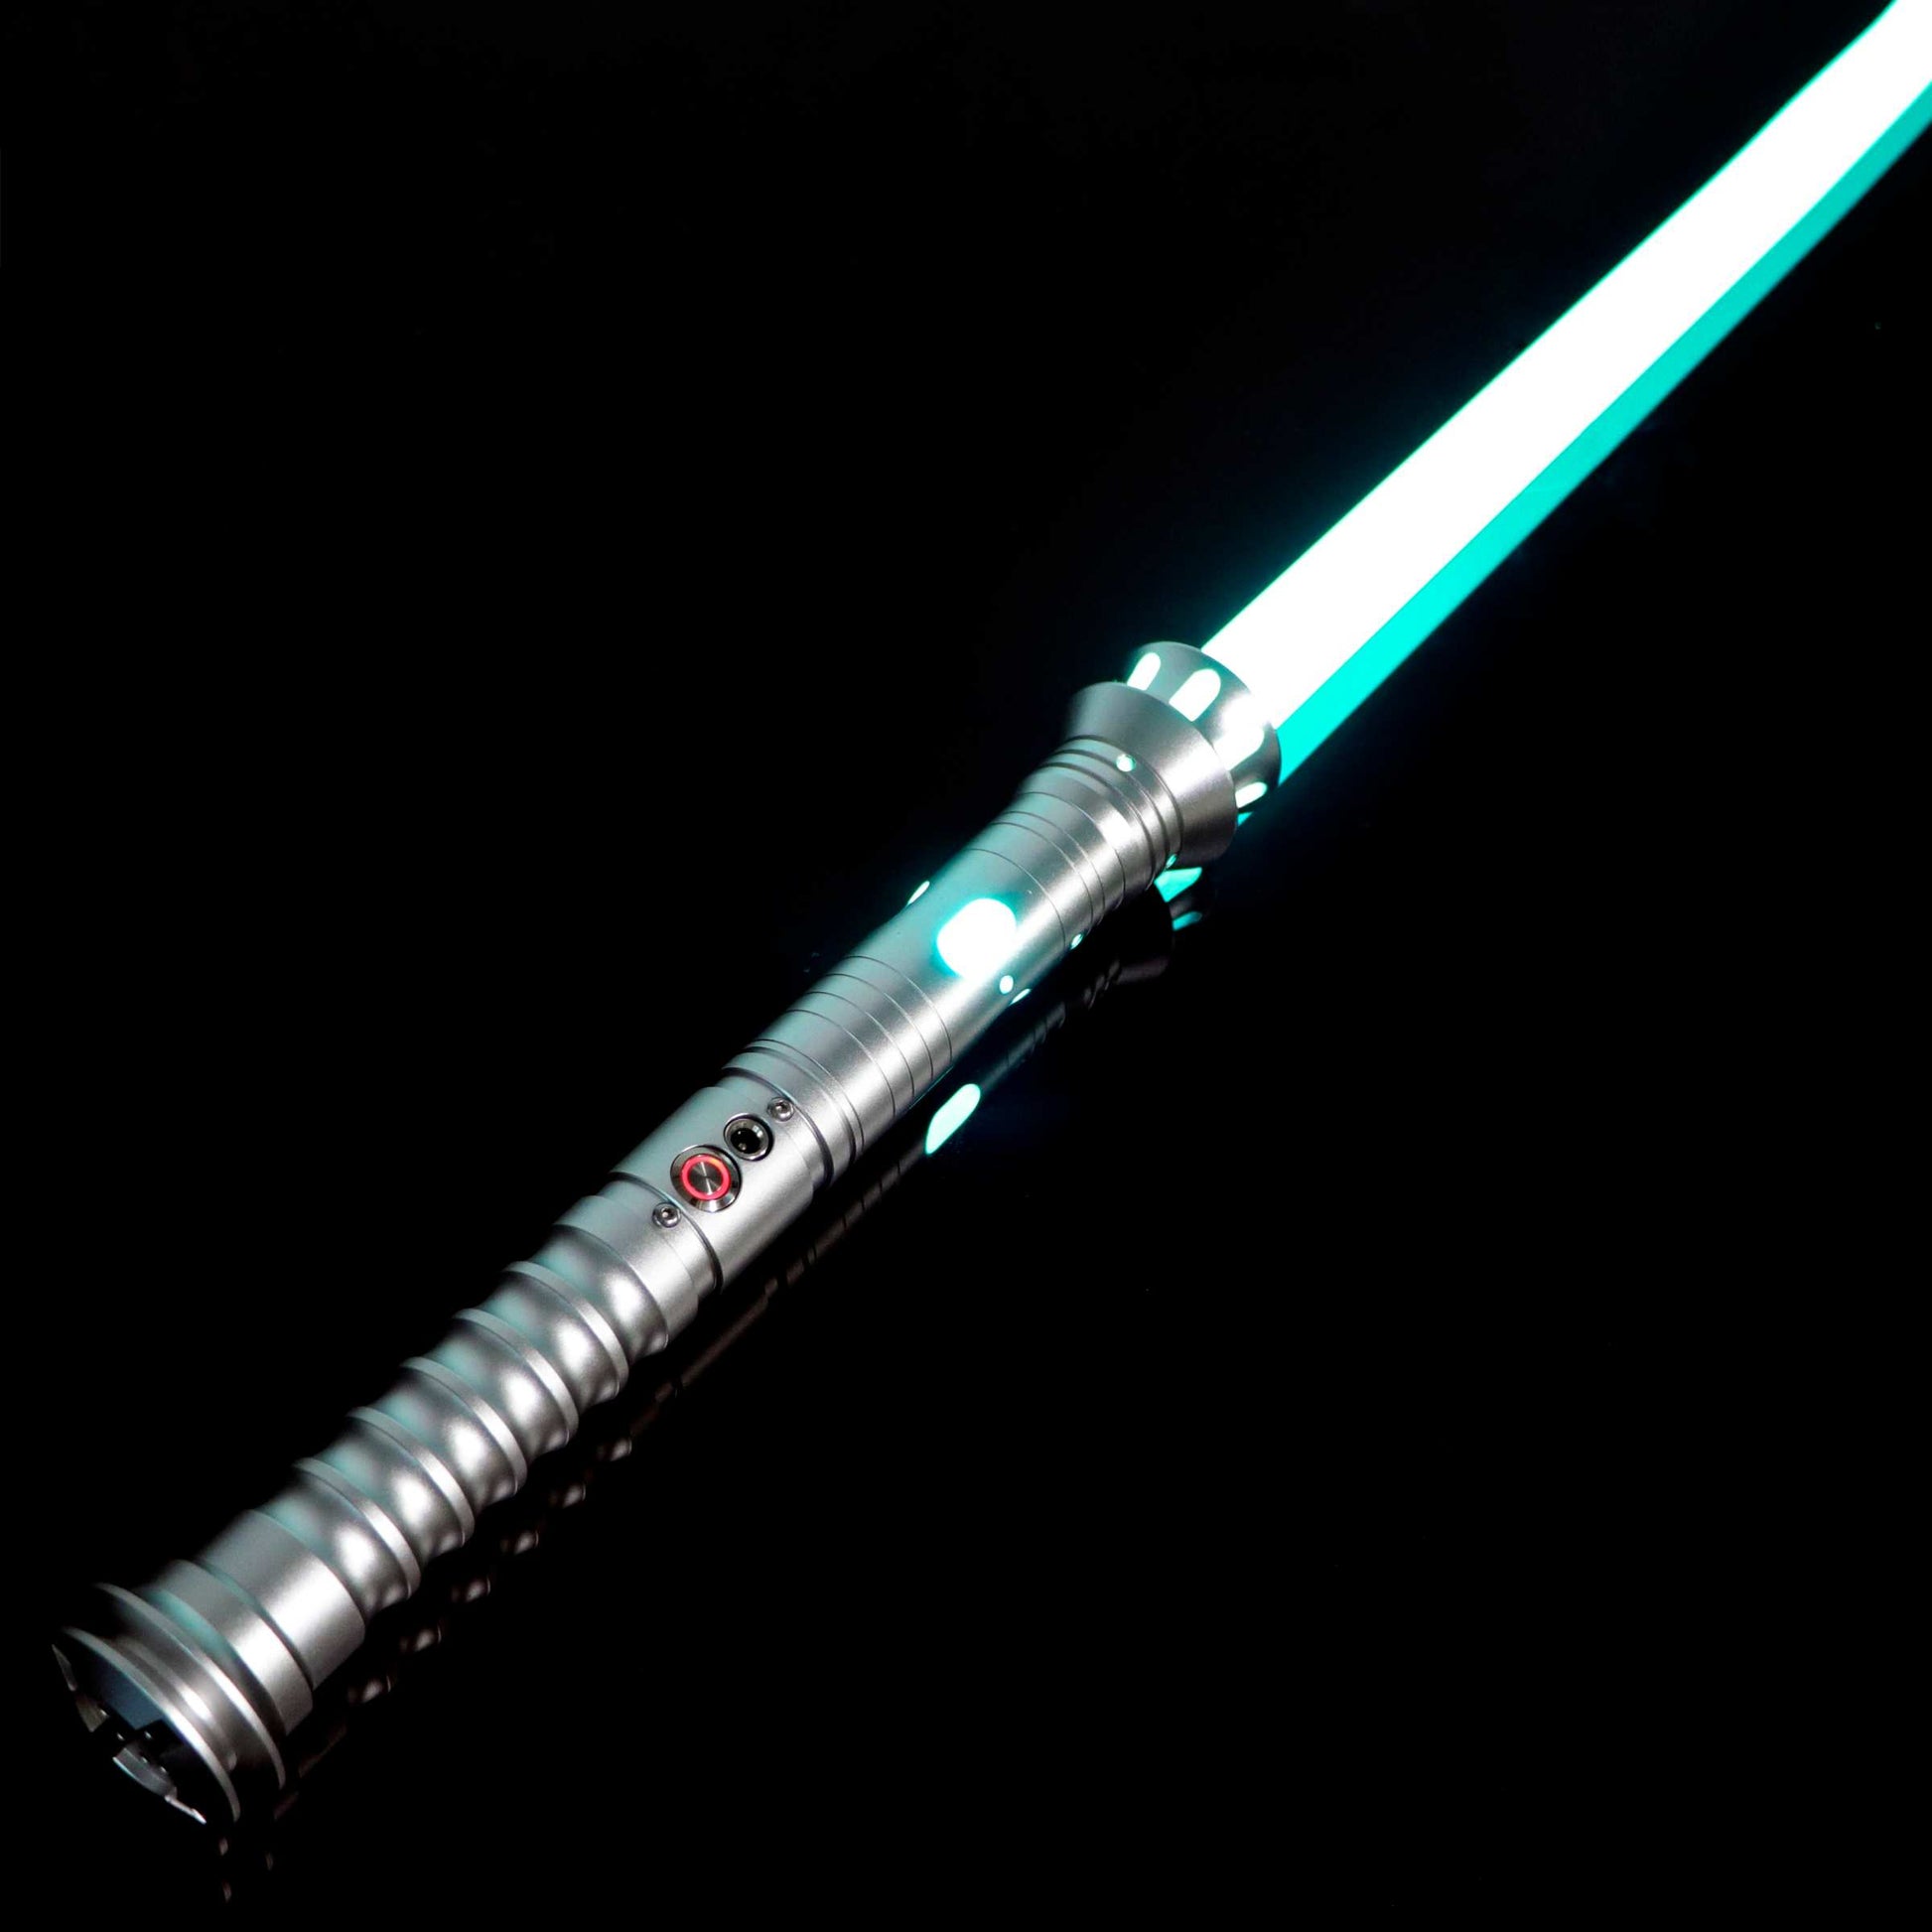 Caseo Lightsaber Silver / RGB isabers